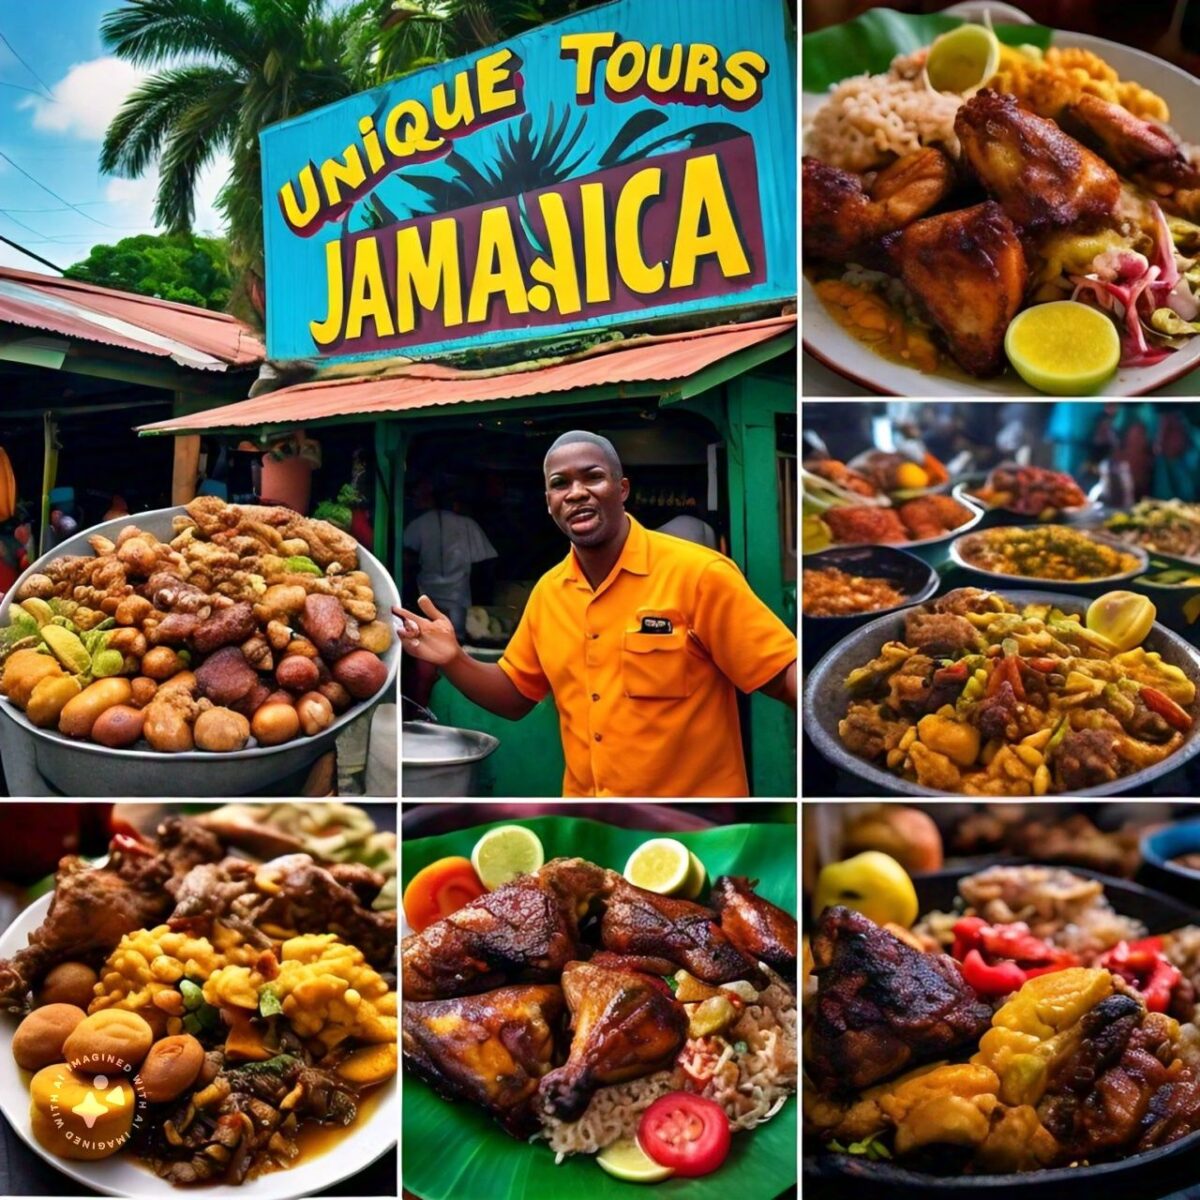 Unique Tours Jamaica Cuisine A Rich Tradition Making Waves on the Global Culinary Scene